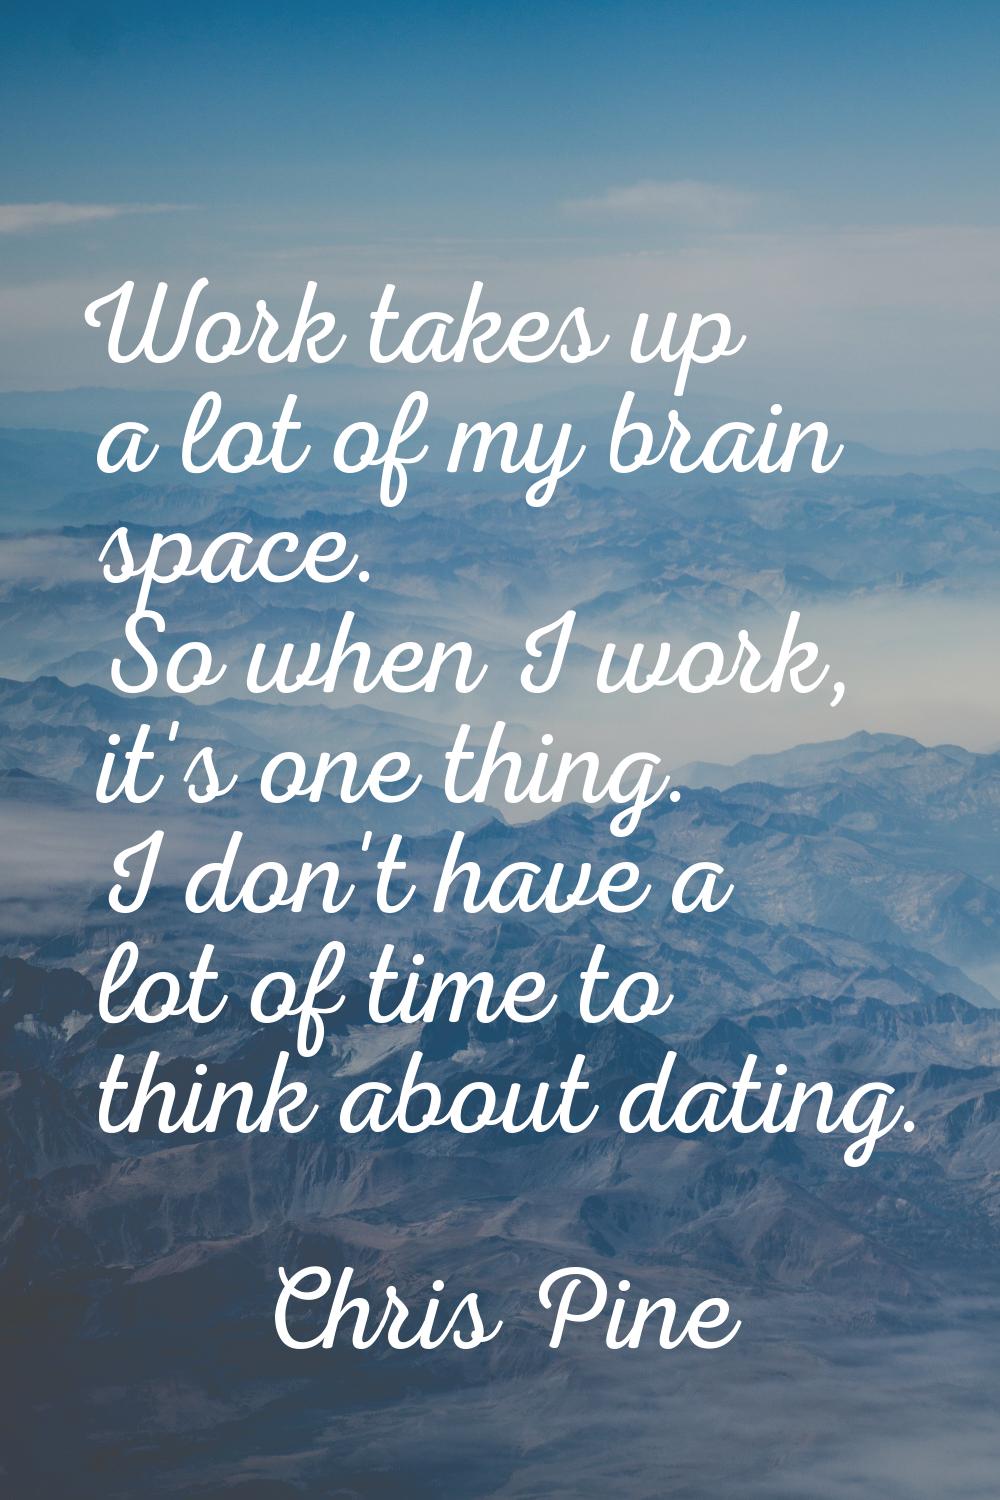 Work takes up a lot of my brain space. So when I work, it's one thing. I don't have a lot of time t